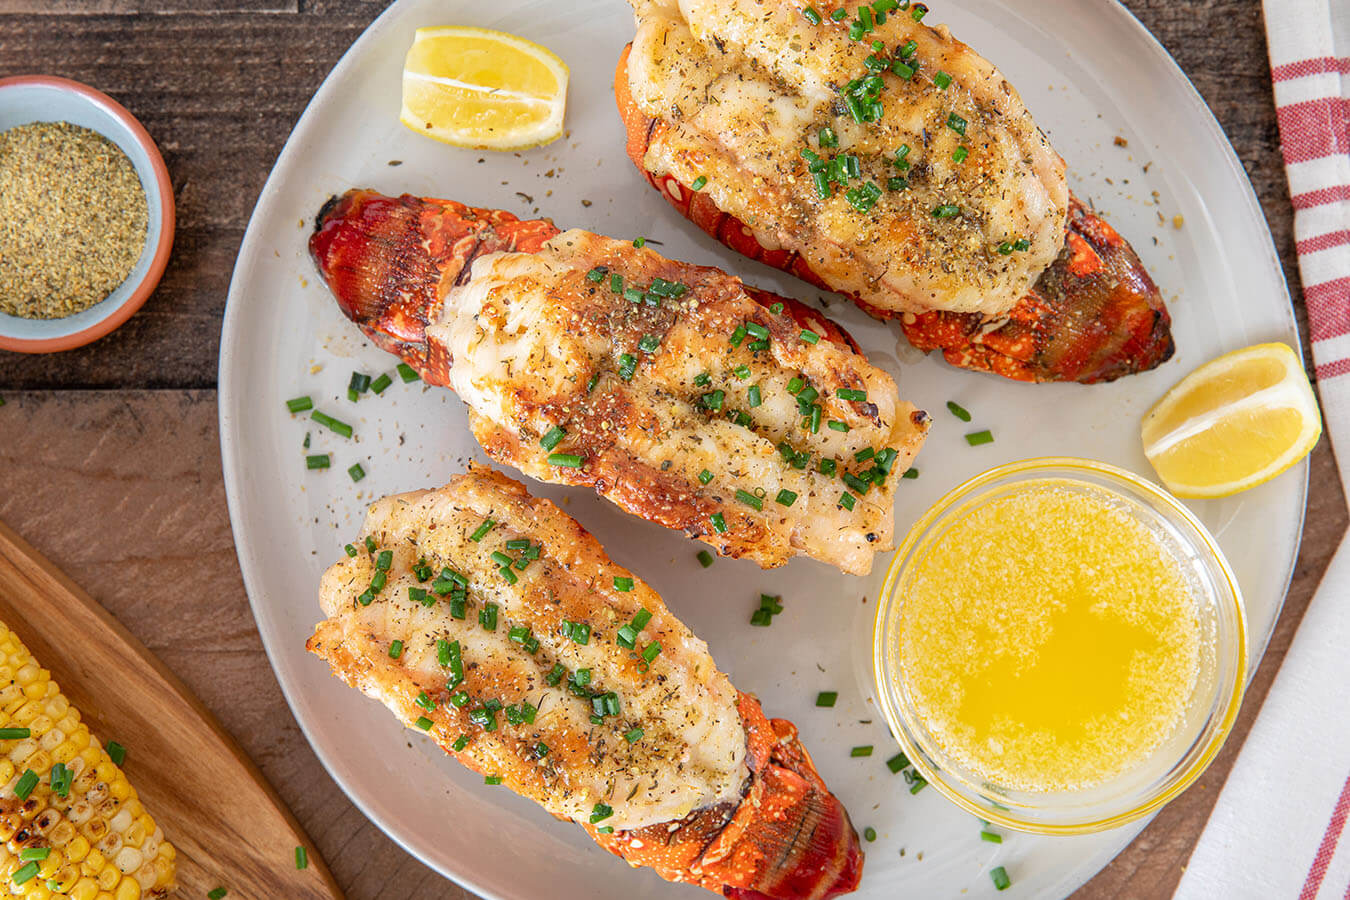 Best Grilled Lobster Tail Recipe - How to Make Grilled Lobster Tail